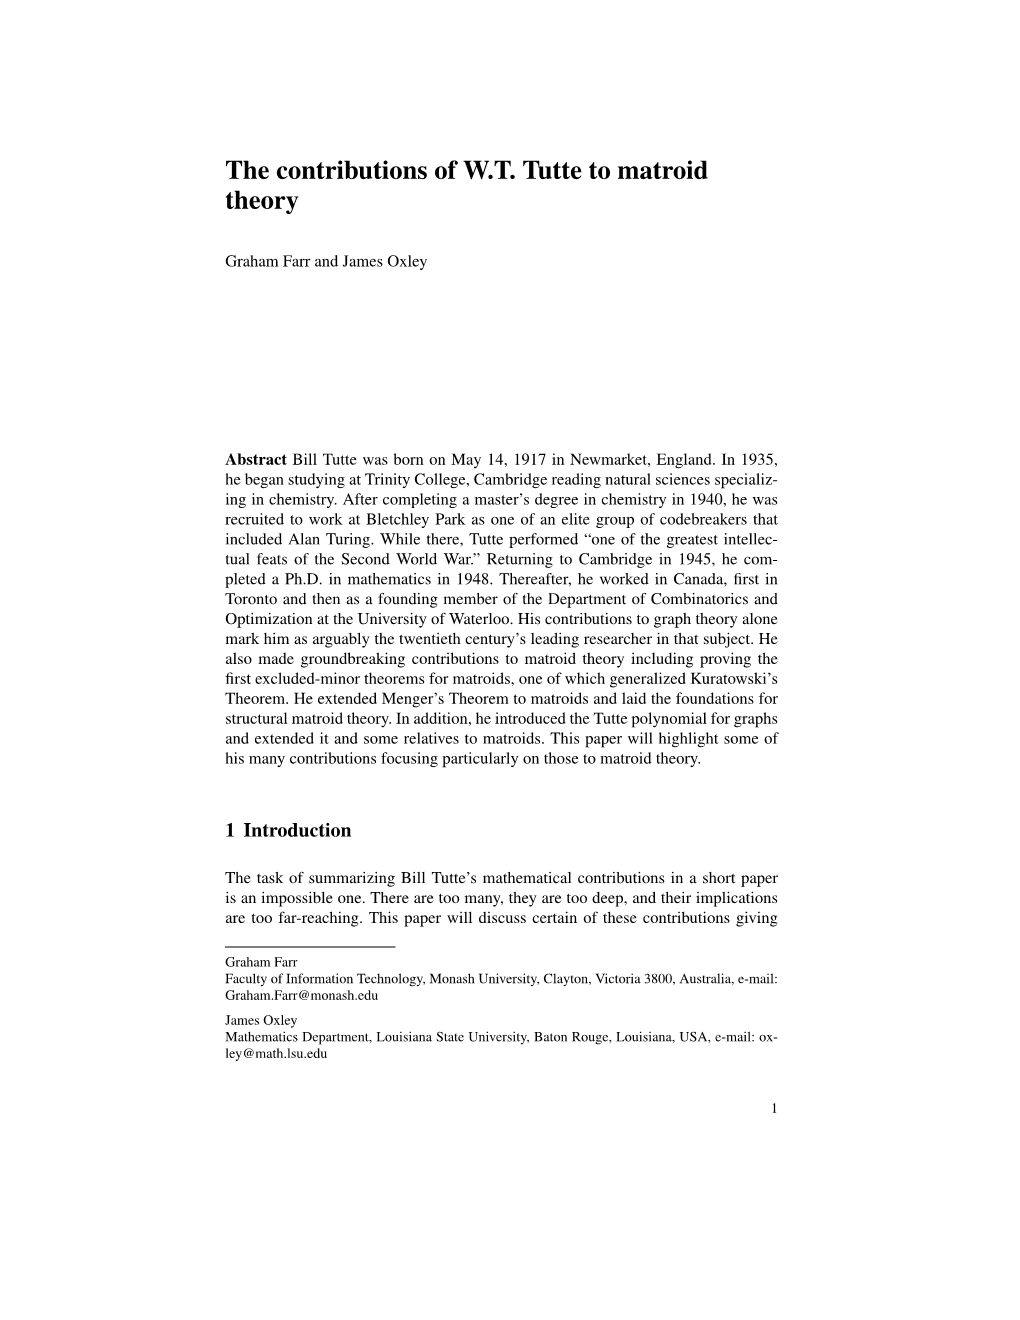 The Contributions of W.T. Tutte to Matroid Theory